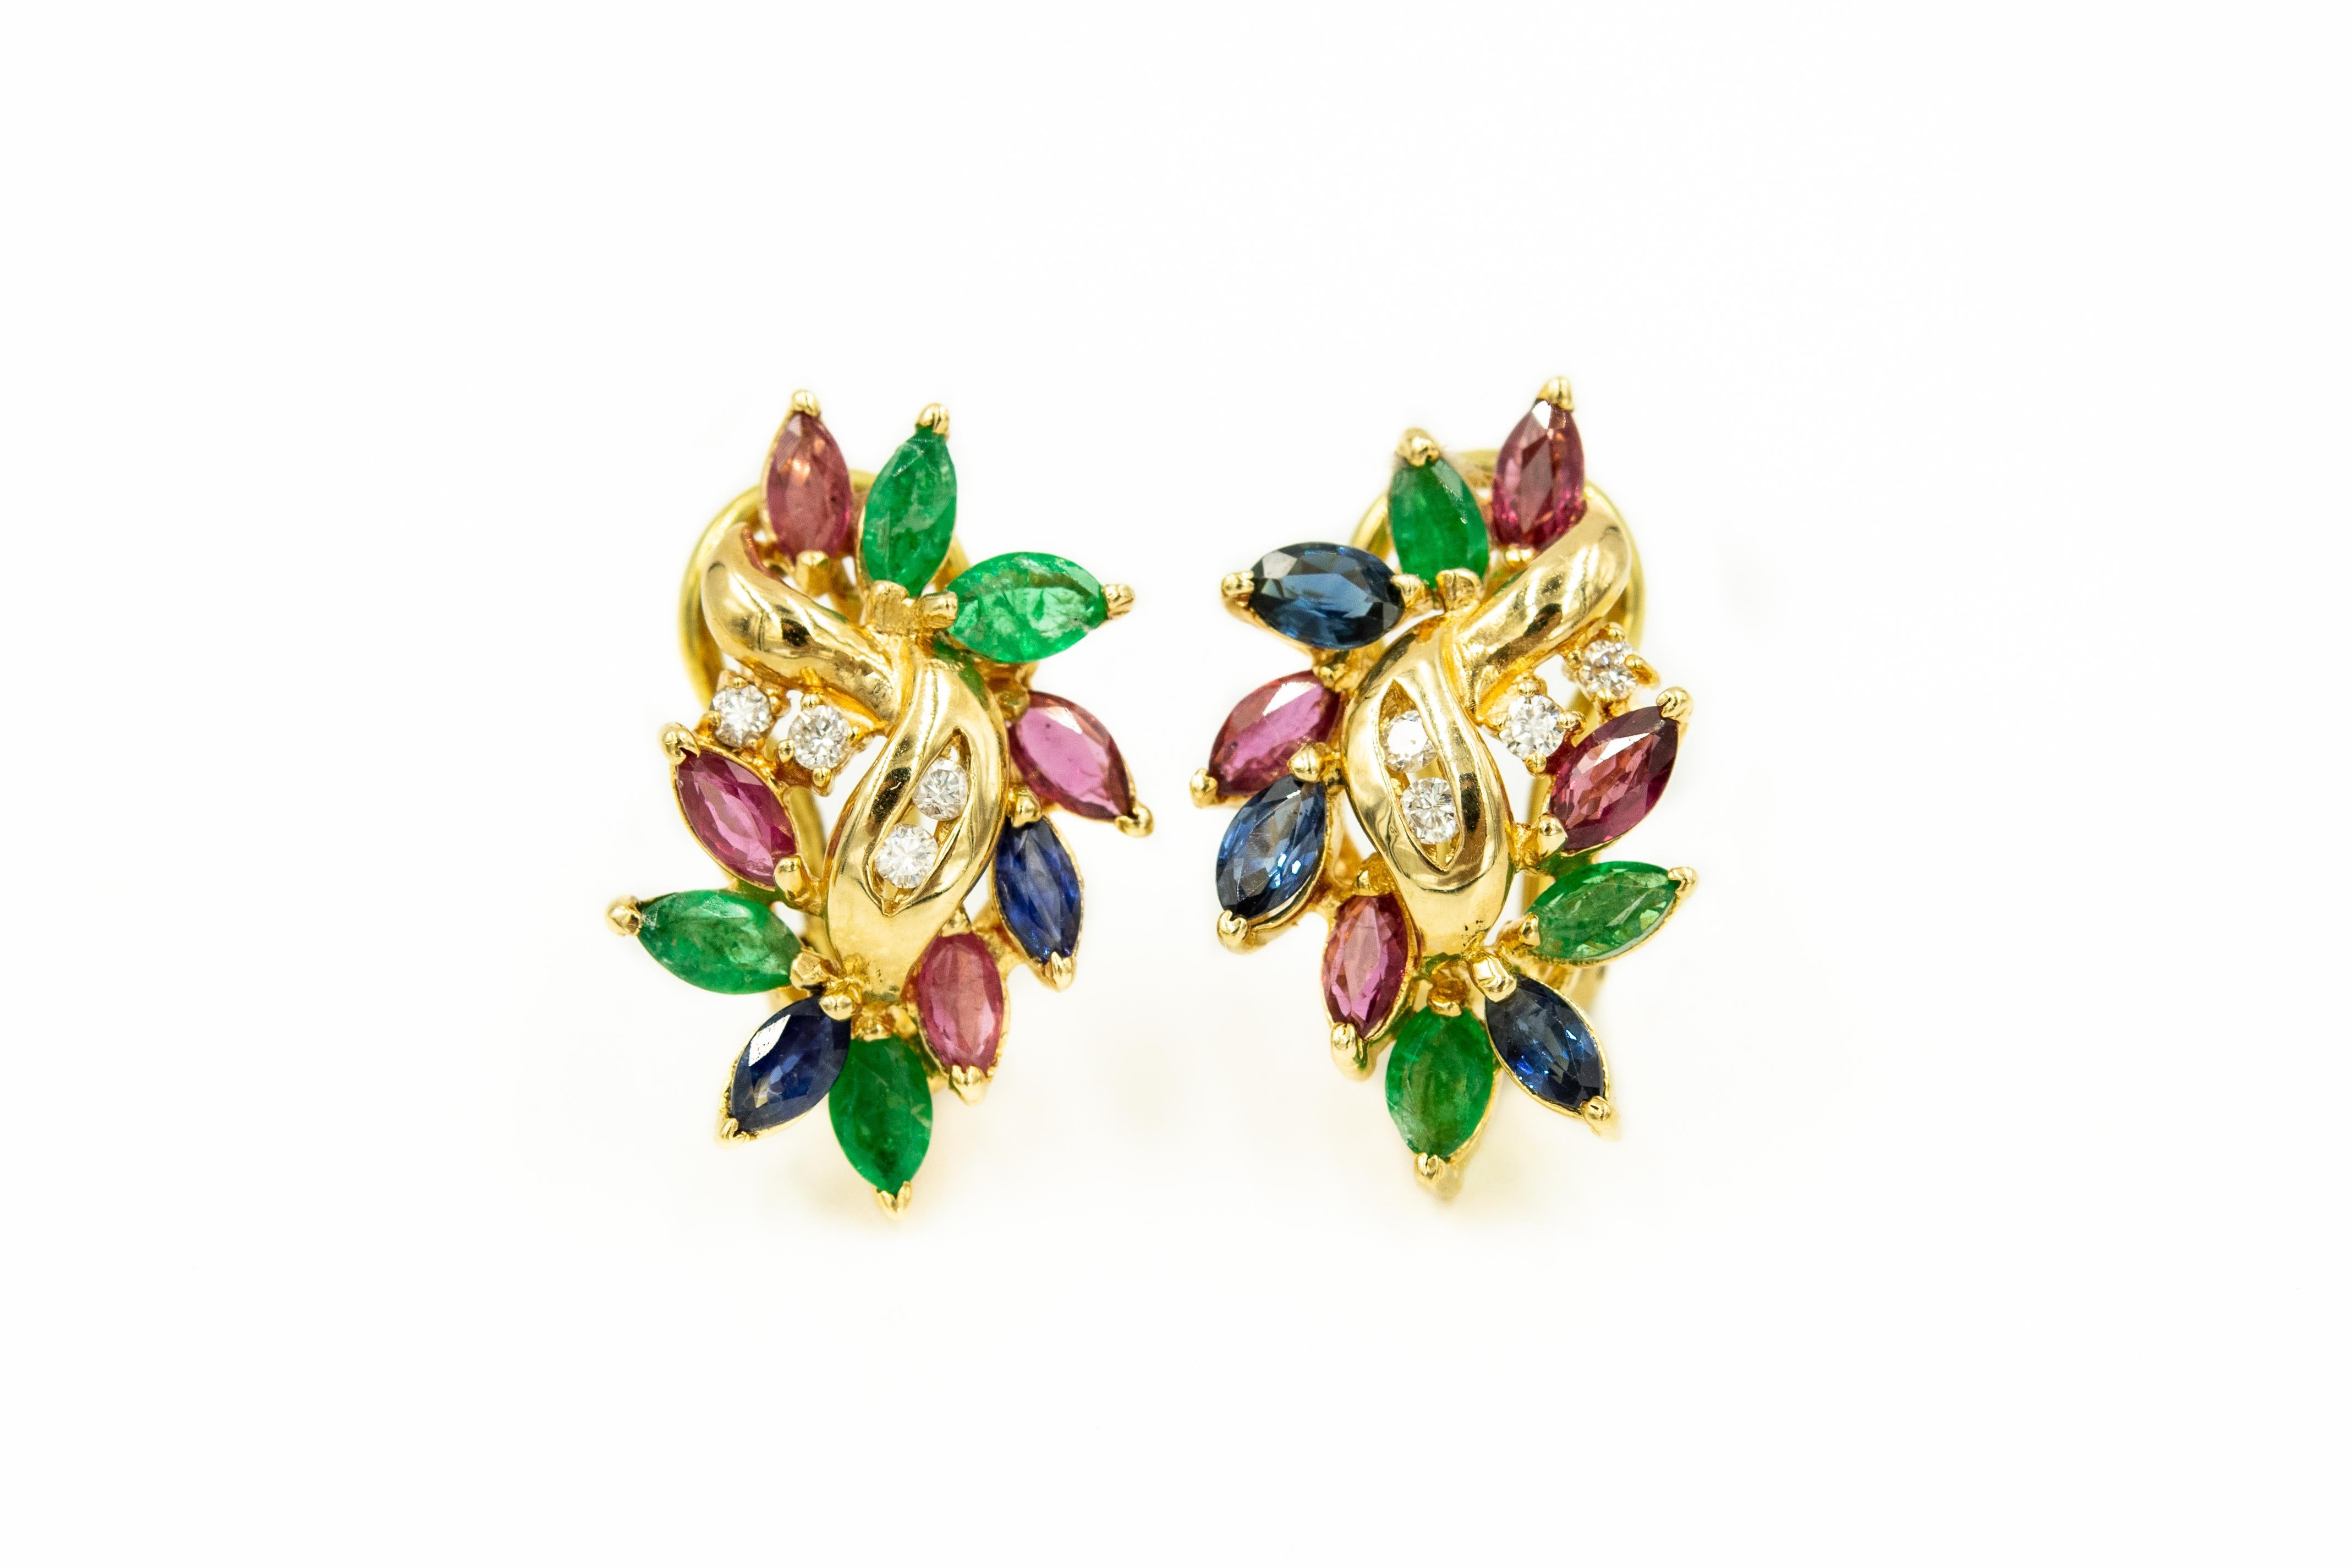 Sapphire, ruby, emerald & diamond earrings, ring and bracelet set includes: 

A pair of 14 yellow gold earrings with marquis rubies, sapphires, emeralds and .16 carats approximate total weight of full cut diamonds.  The earrings have a post and